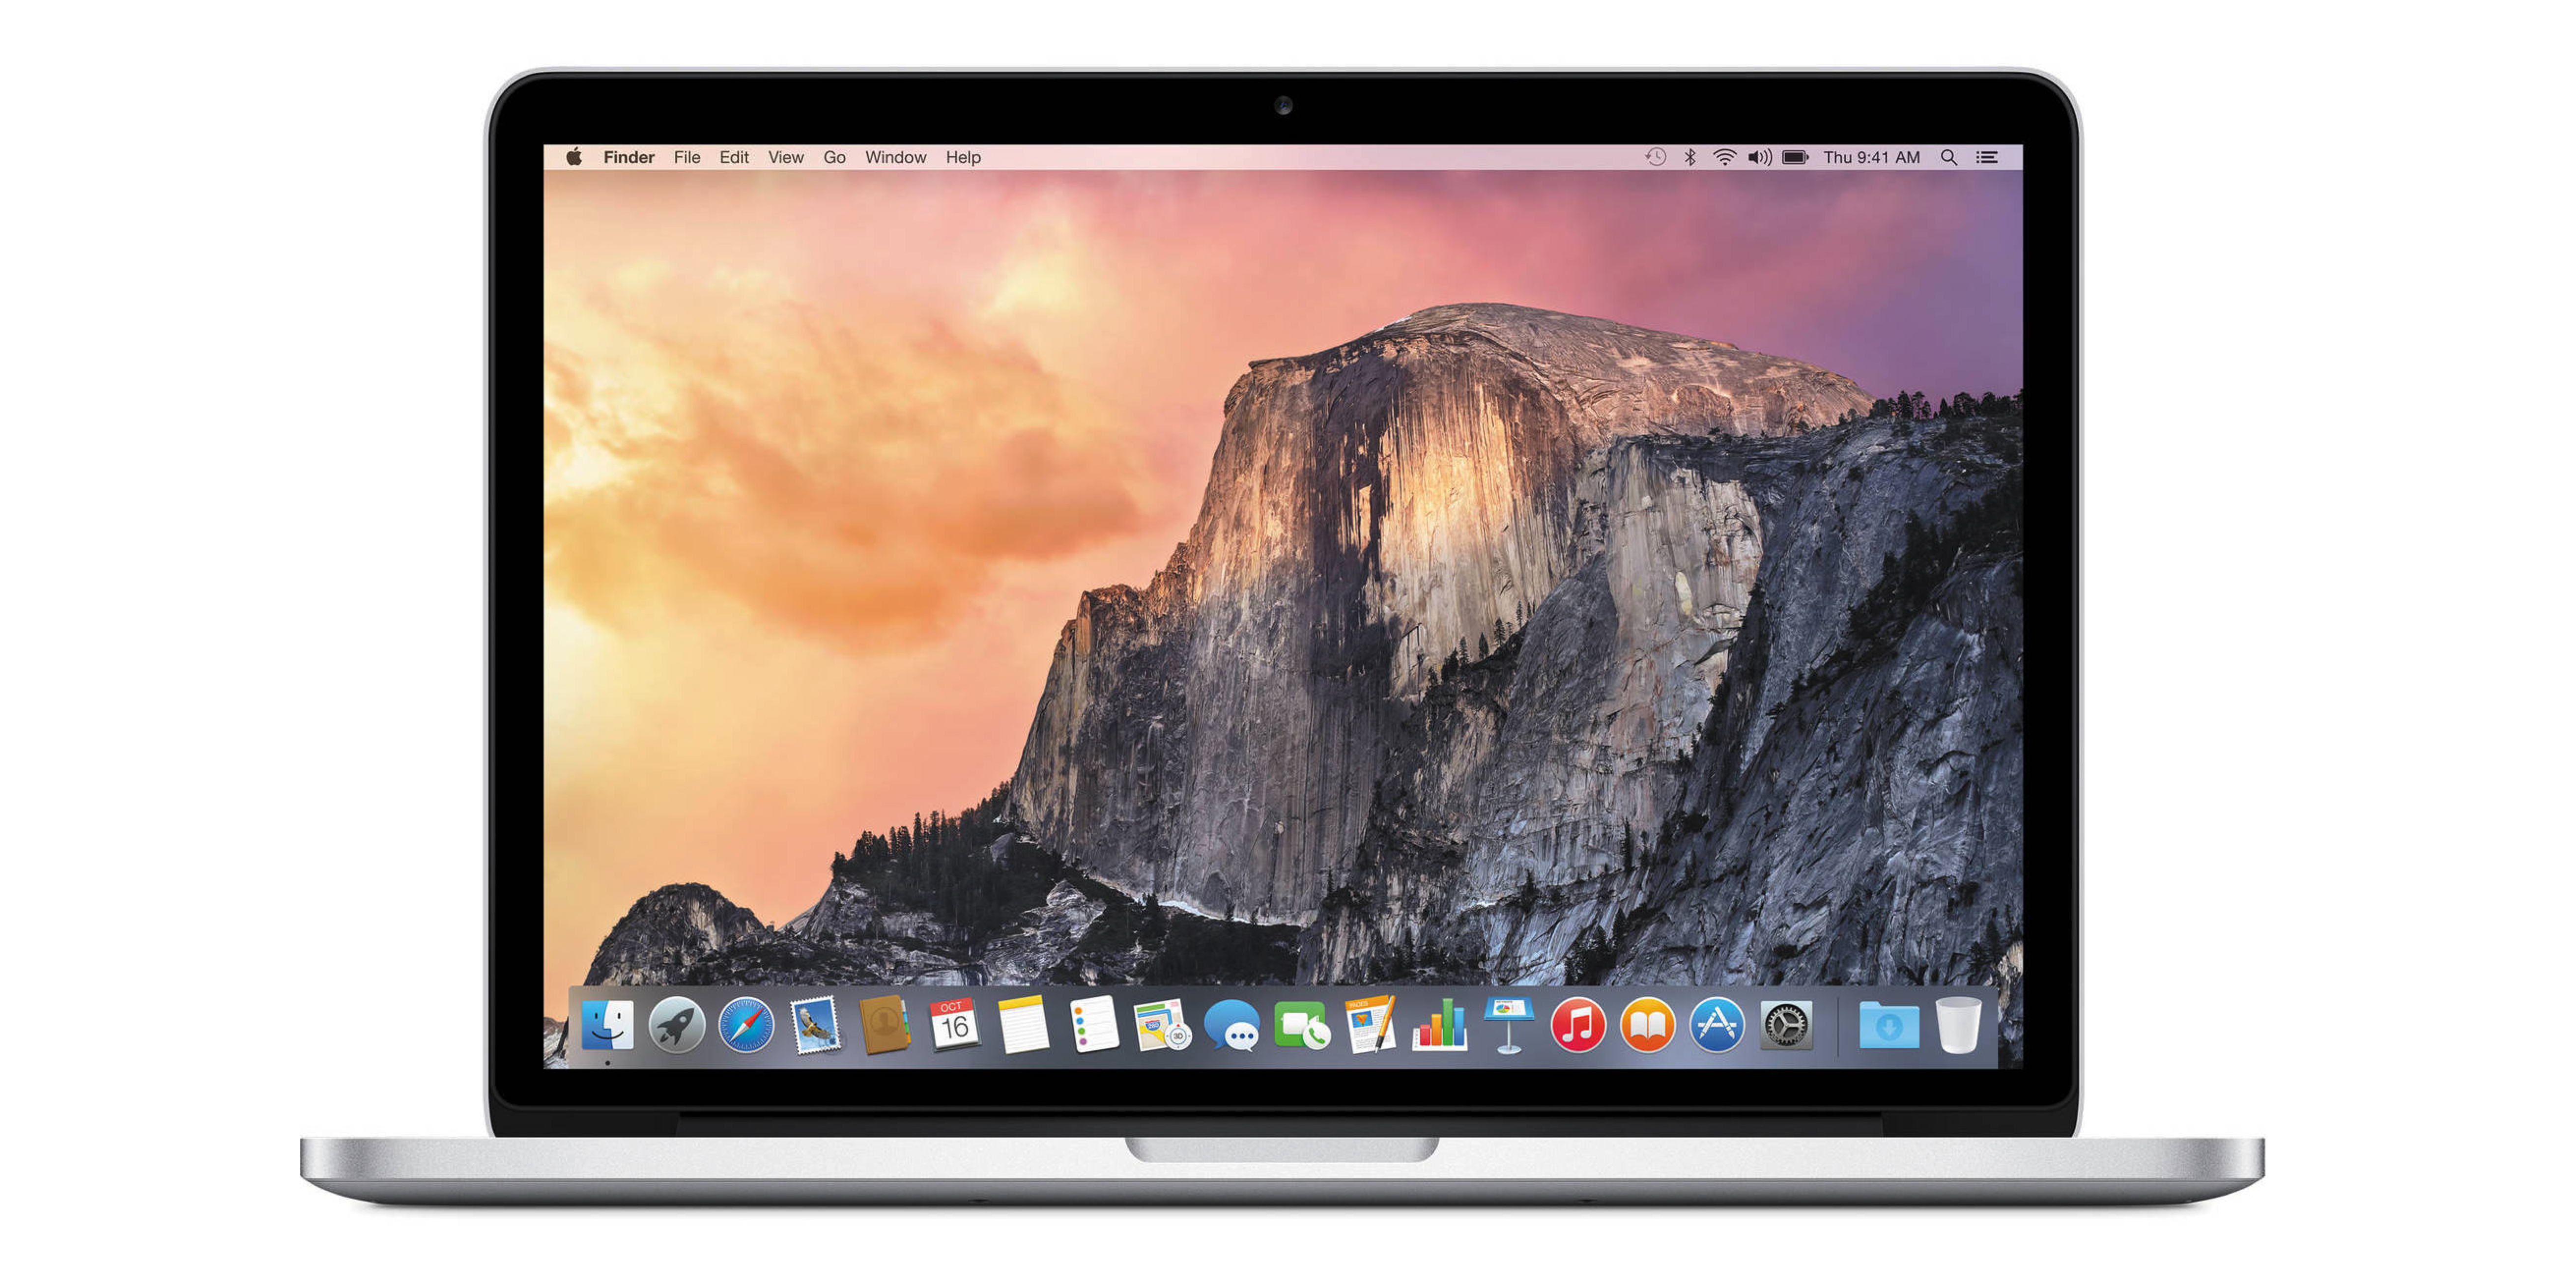 13-inch-macbook-pro-with-retina-display-and-force-touch-mf840lla-sale-02